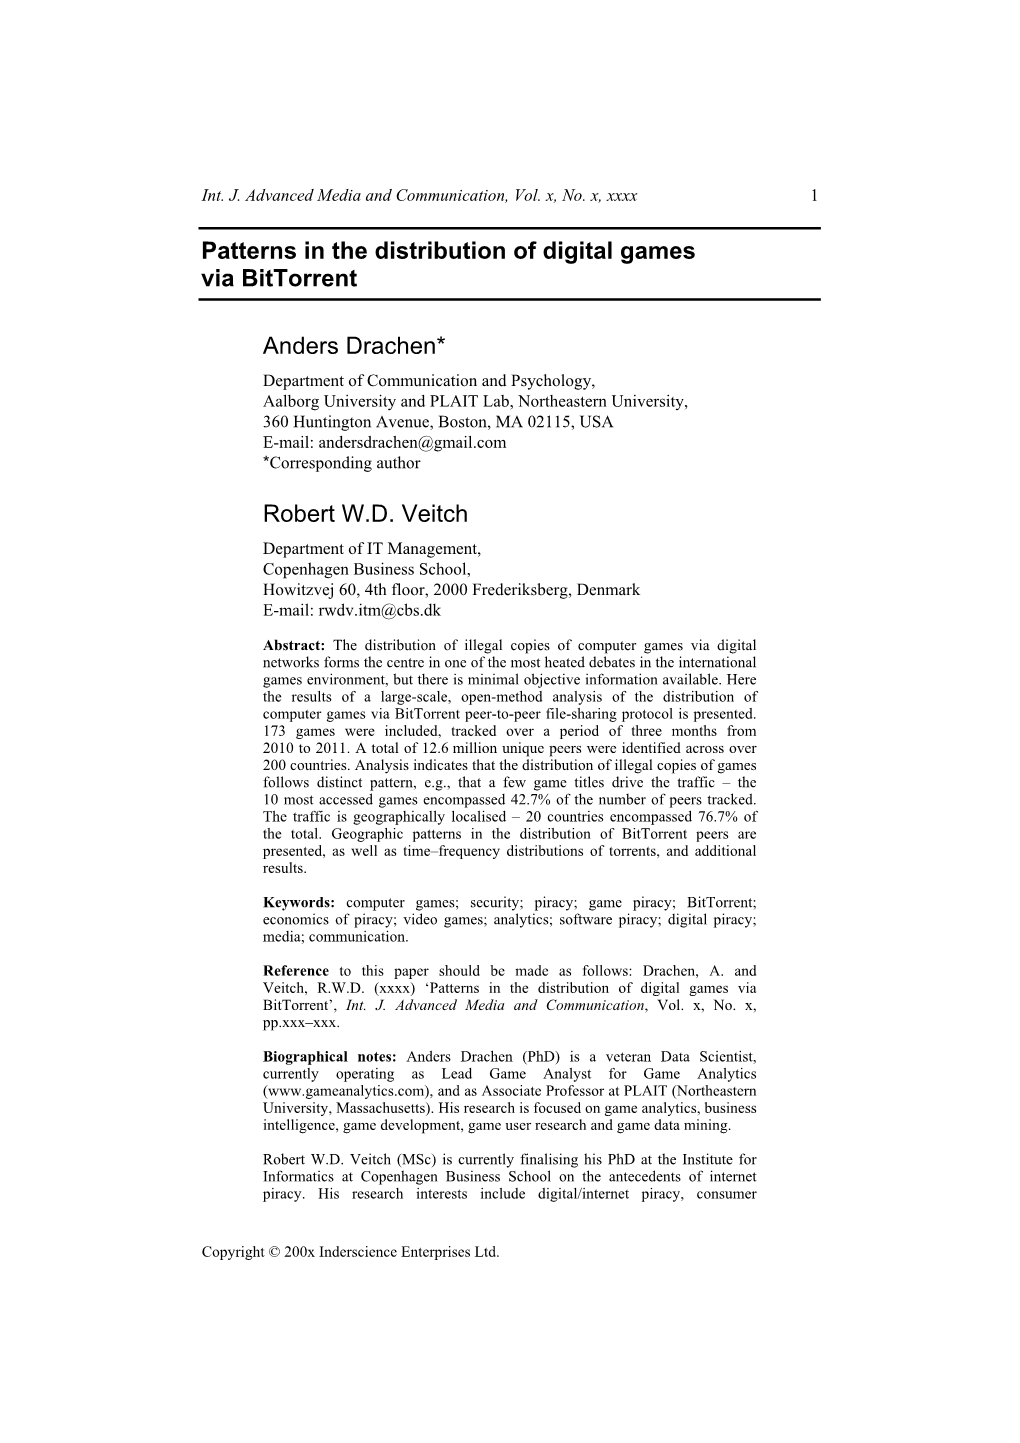 Patterns in the Distribution of Digital Games Via Bittorrent Anders